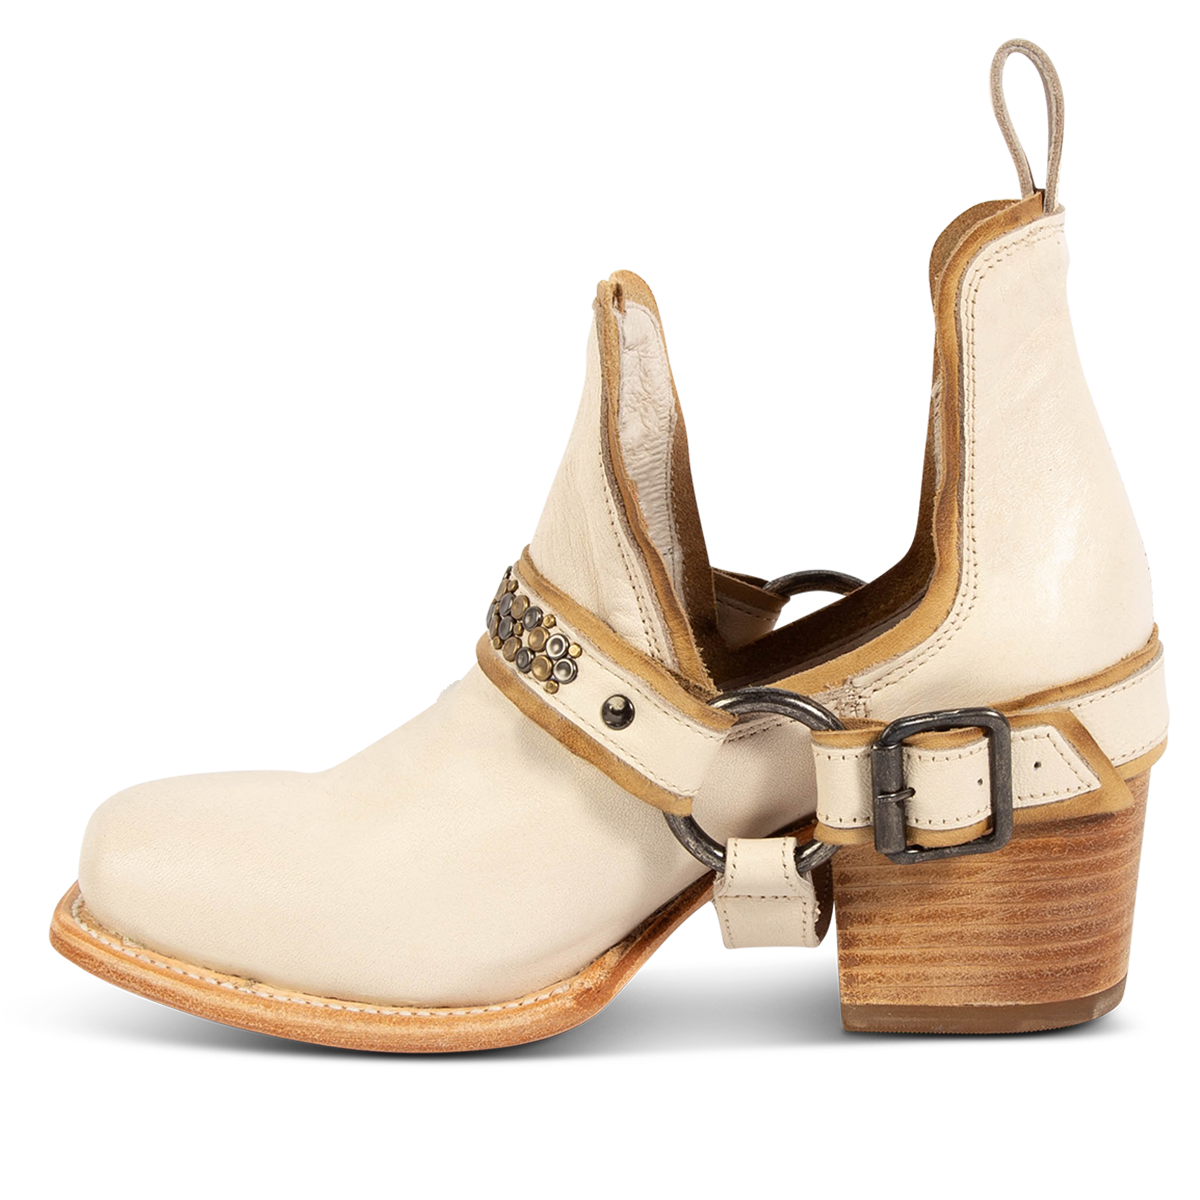 Inside view showing FREEBIRD women's Dusty off white bootie with studded embellishments, an ankle harness and a slip on leather pull strap